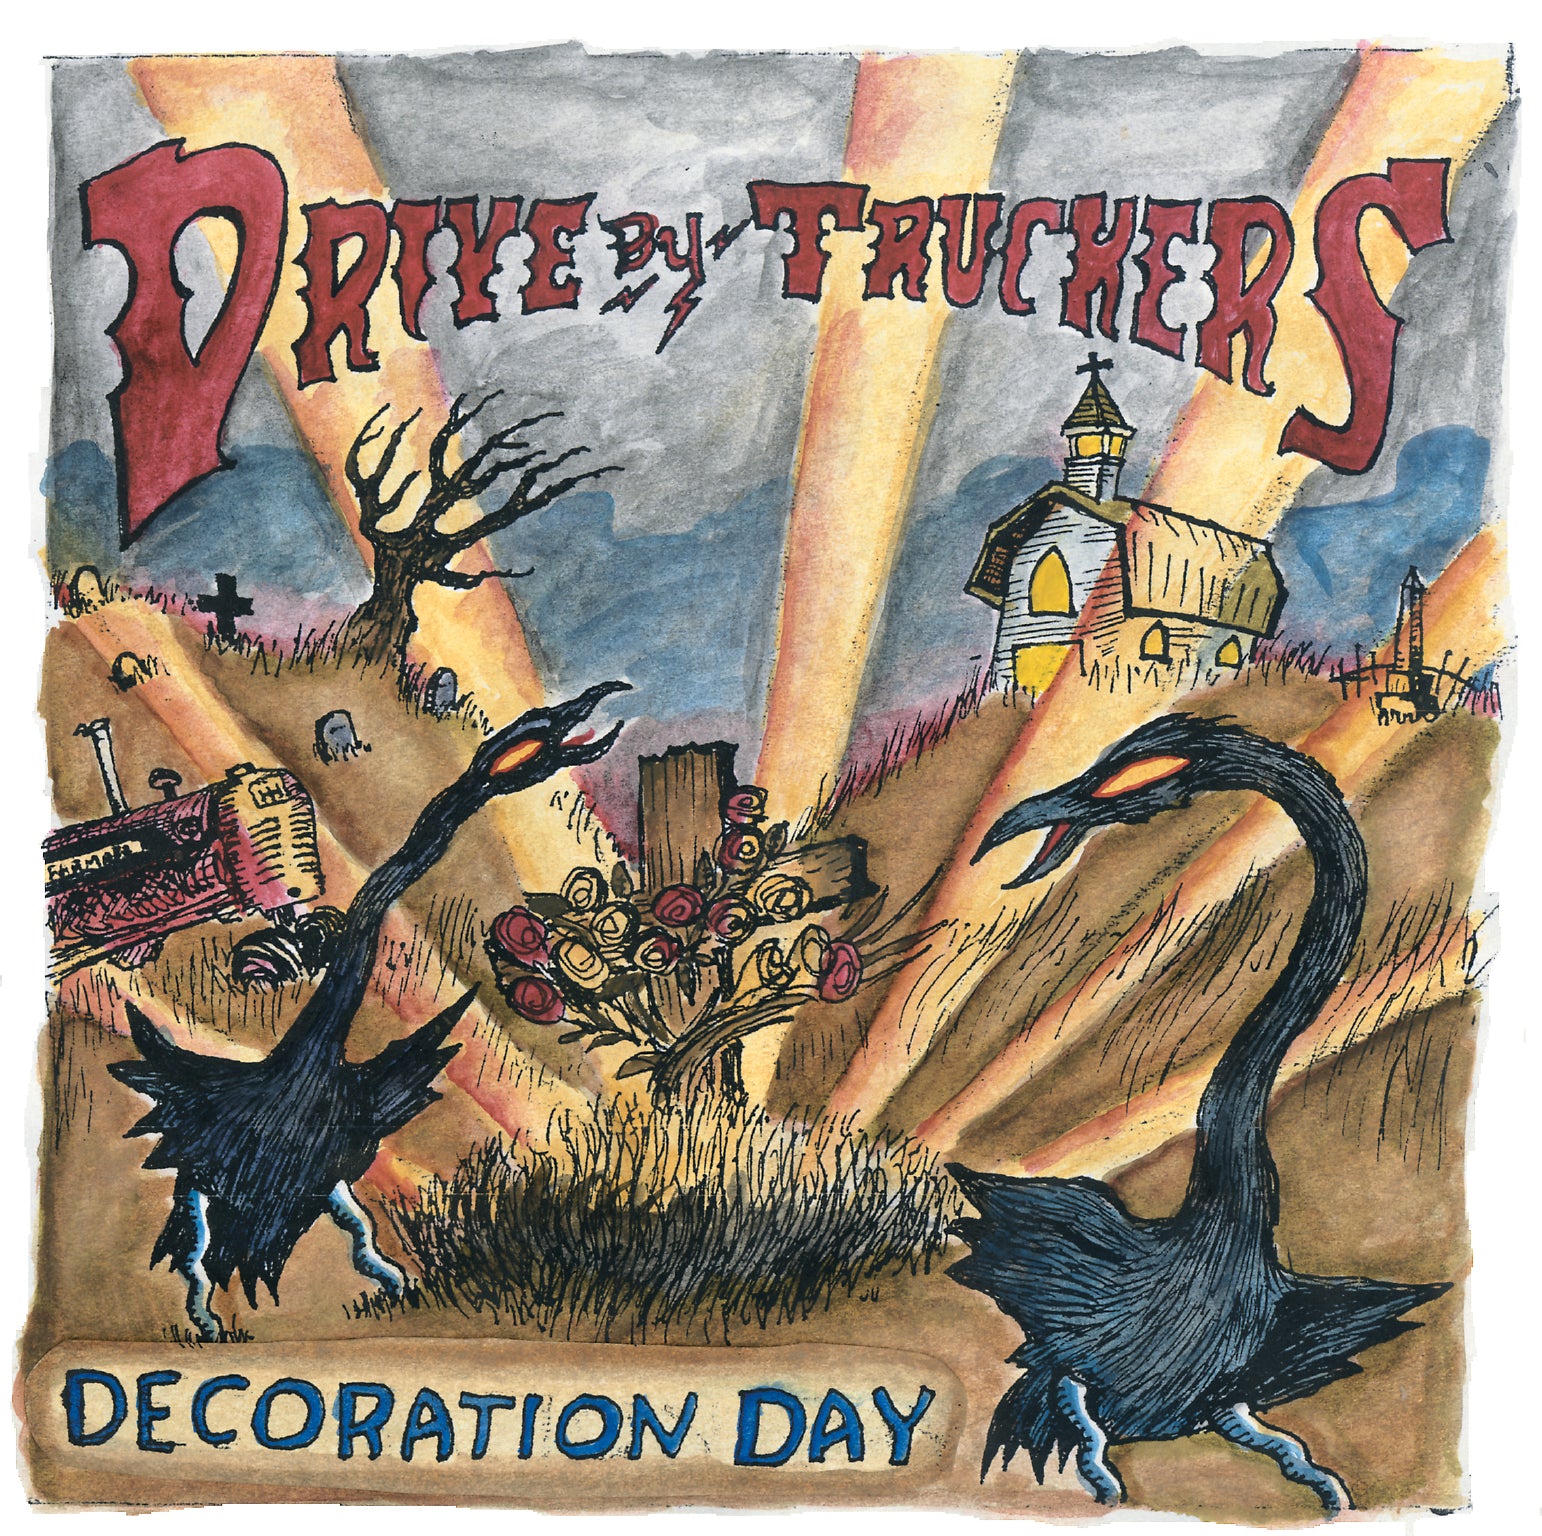 Drive-By Truckers - Decoration Day [CD]